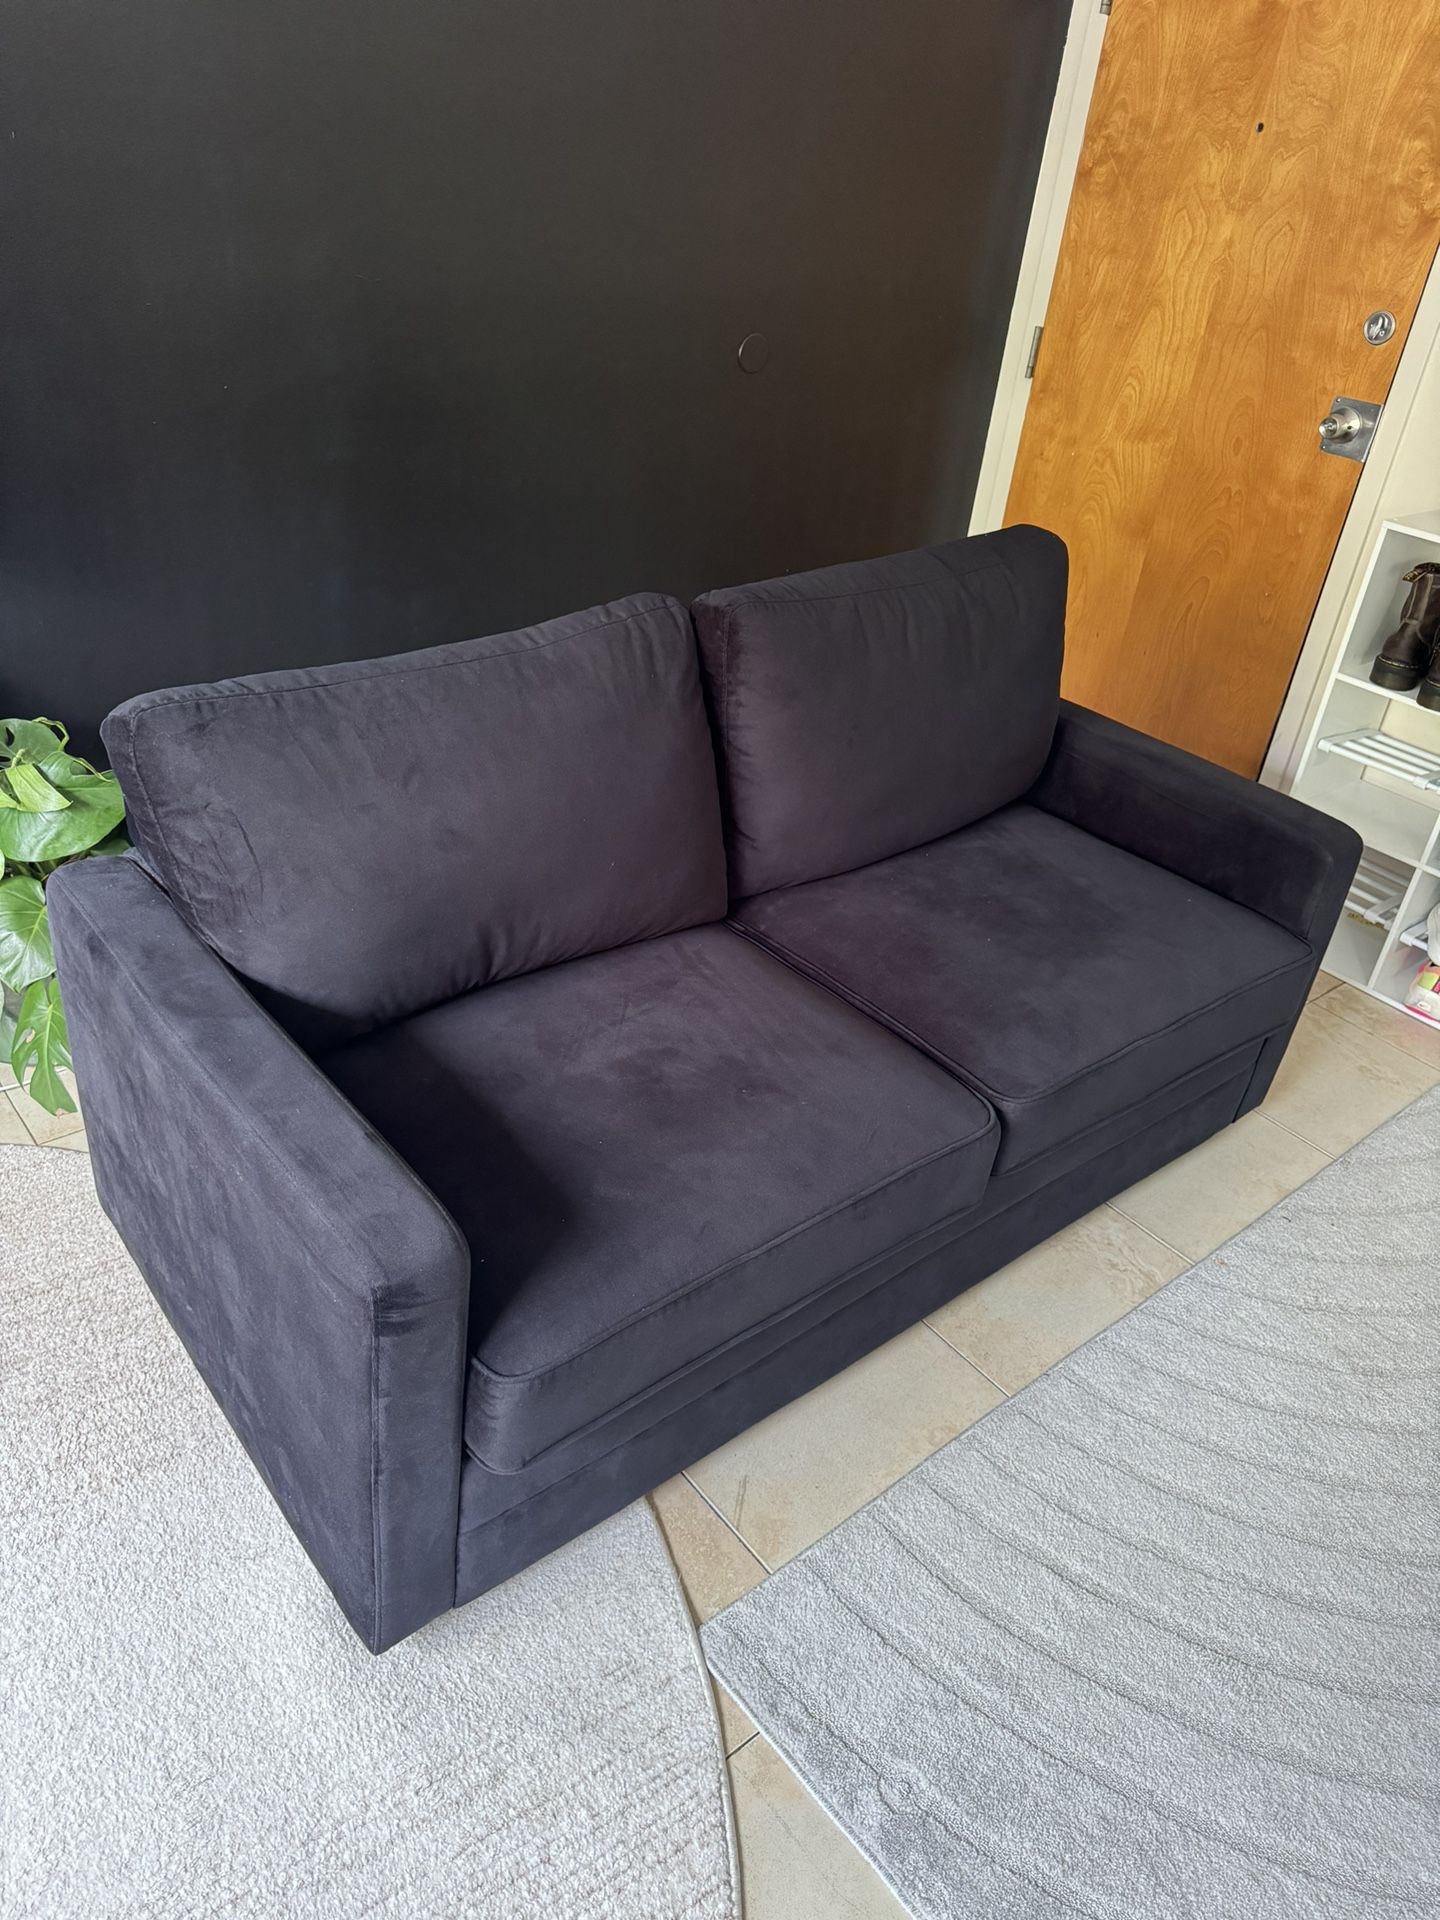 Sophisticated black (pull out) couch